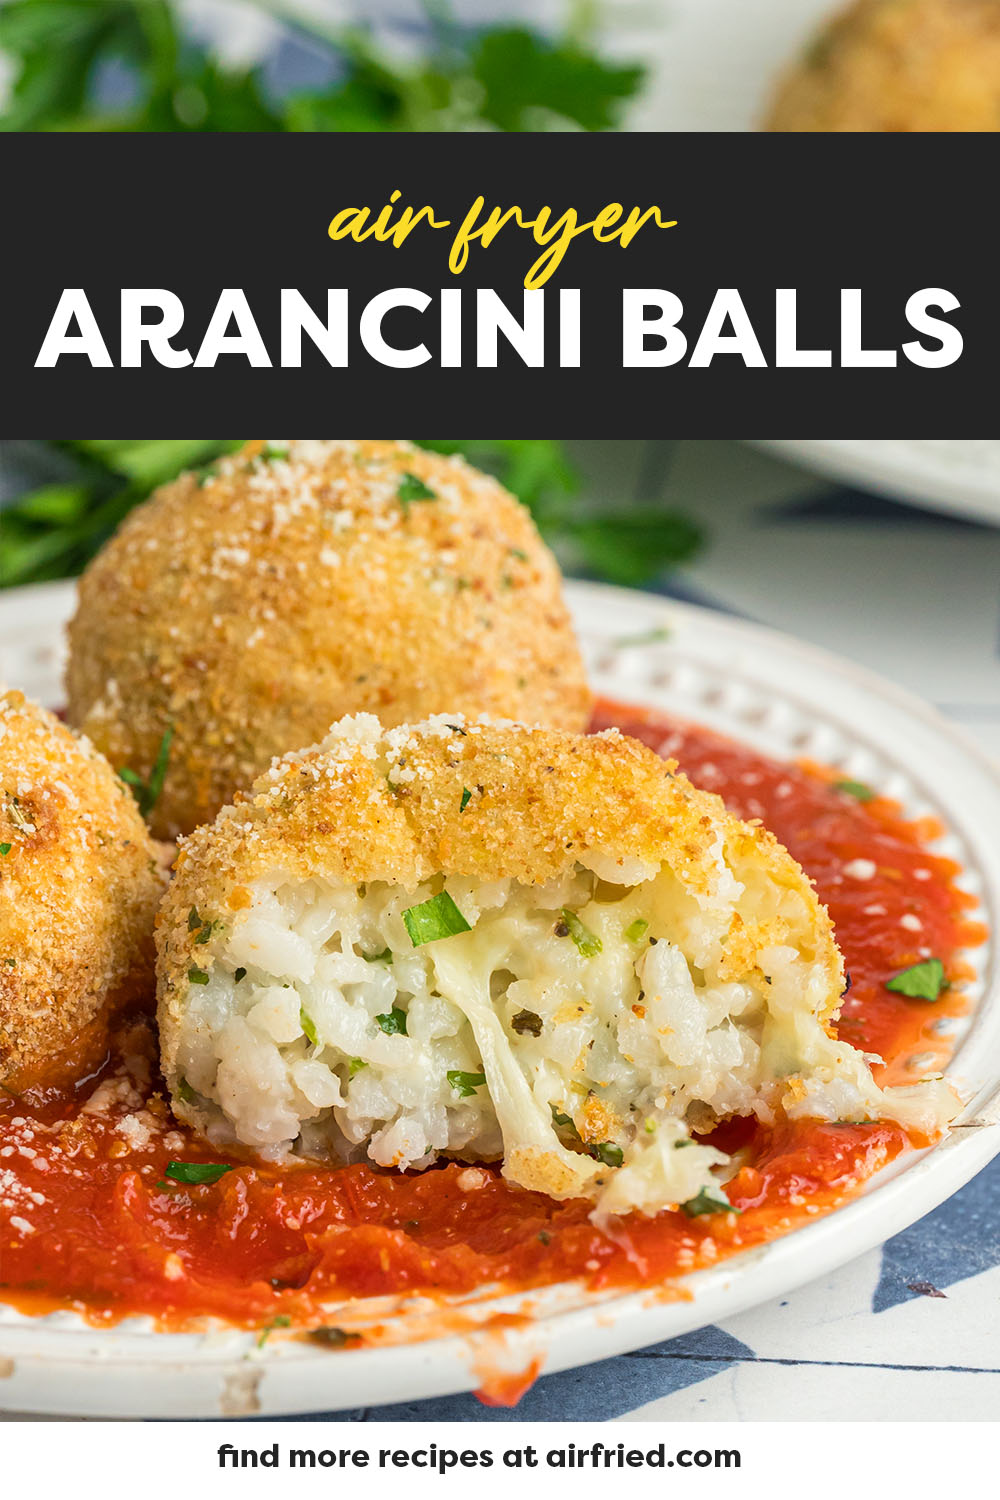 Our air fryer arancini has a ton of flavor in a crispy shell!  The rice is soft and fluffy with perfectly melted cheese in the middle!